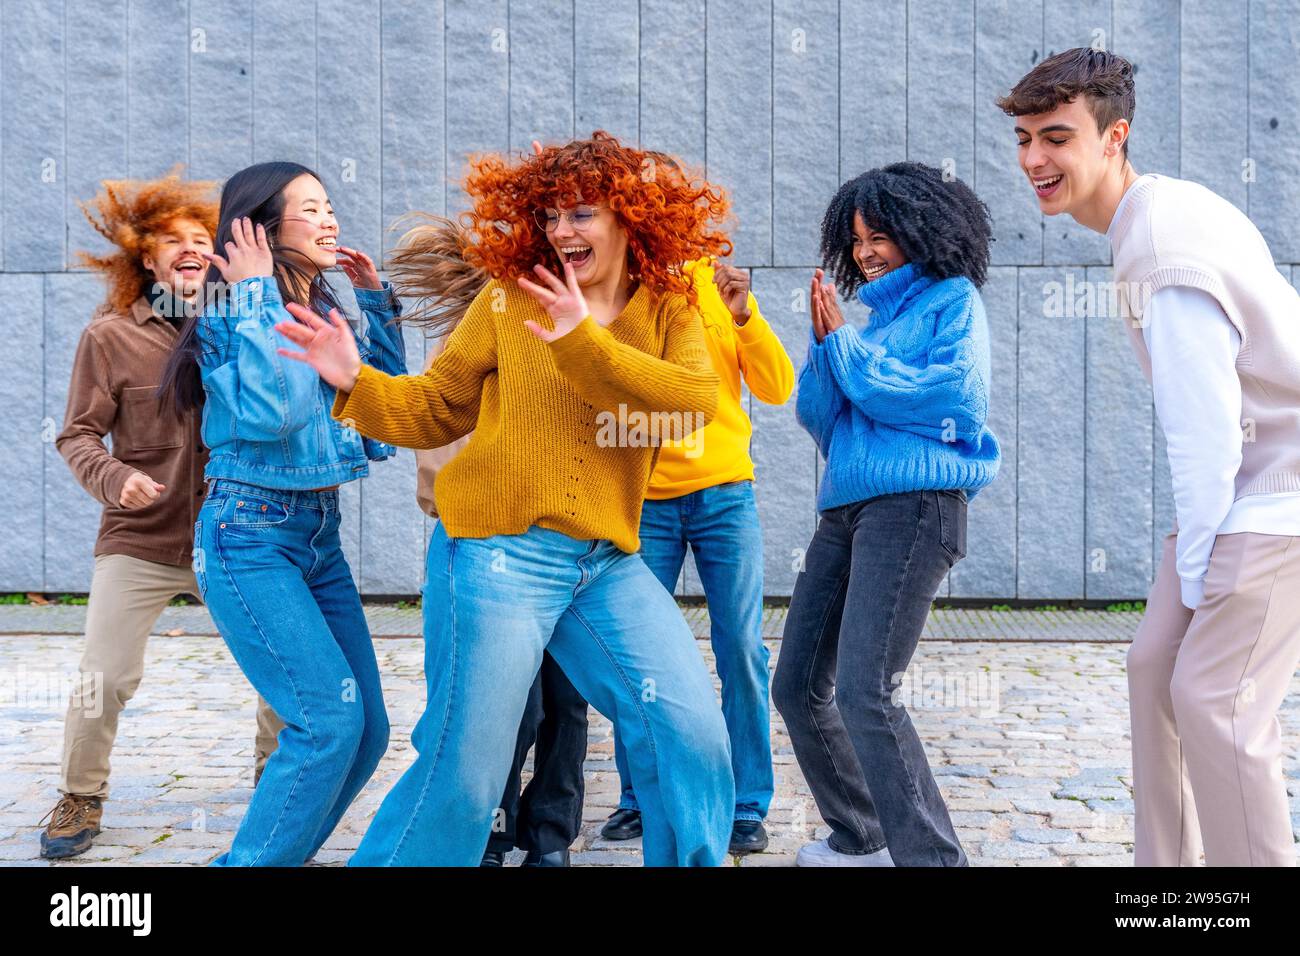 Frontal view of a happy girl dancing with a group of friends in the city Stock Photo